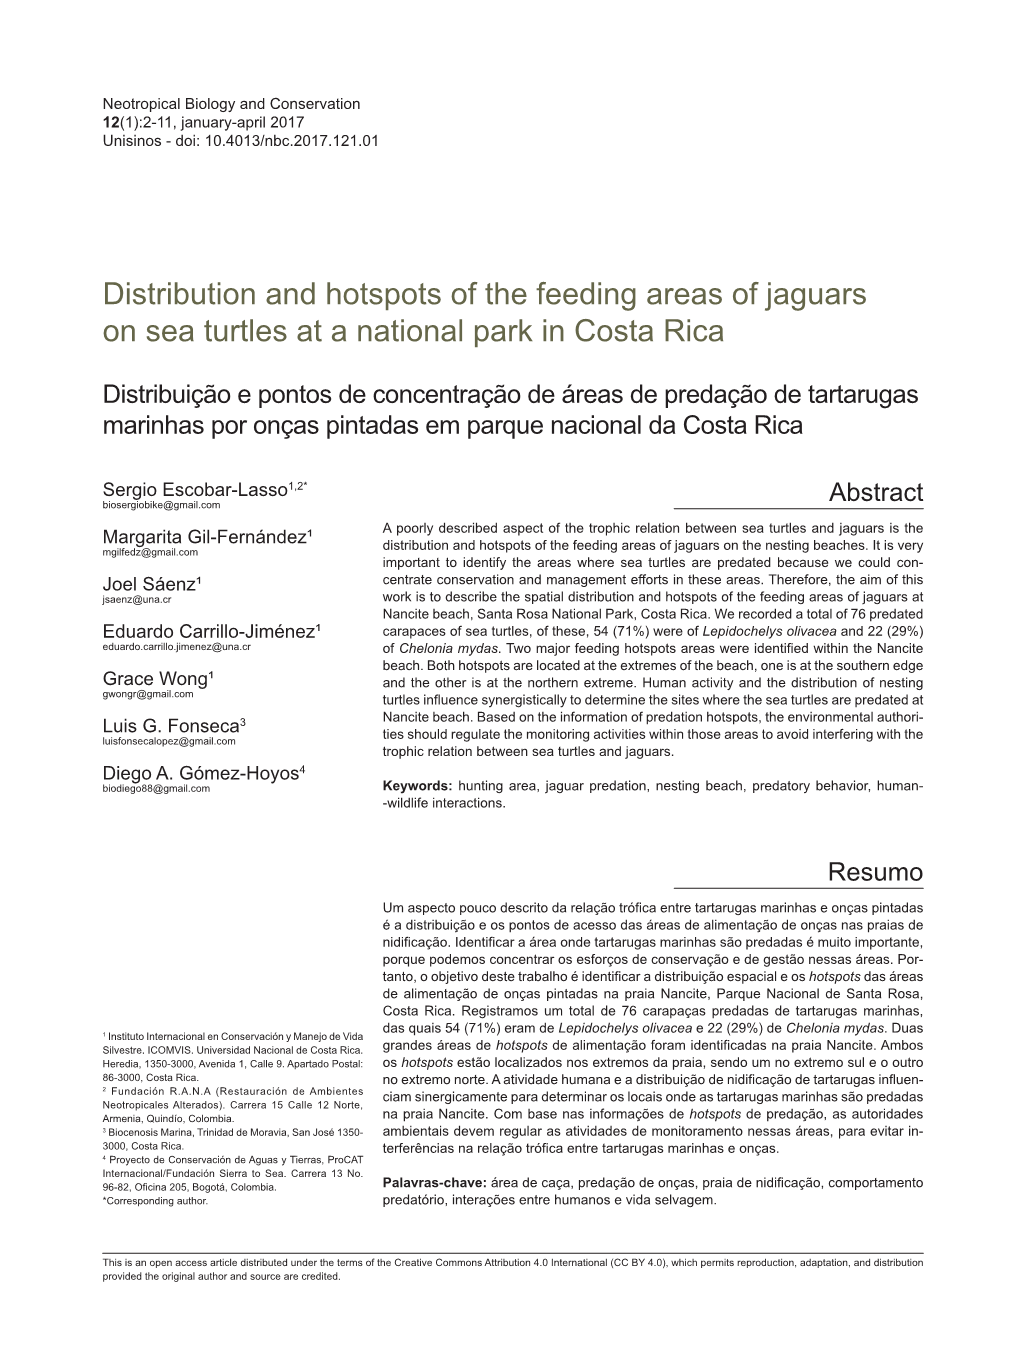 Distribution and Hotspots of the Feeding Areas of Jaguars on Sea Turtles at a National Park in Costa Rica